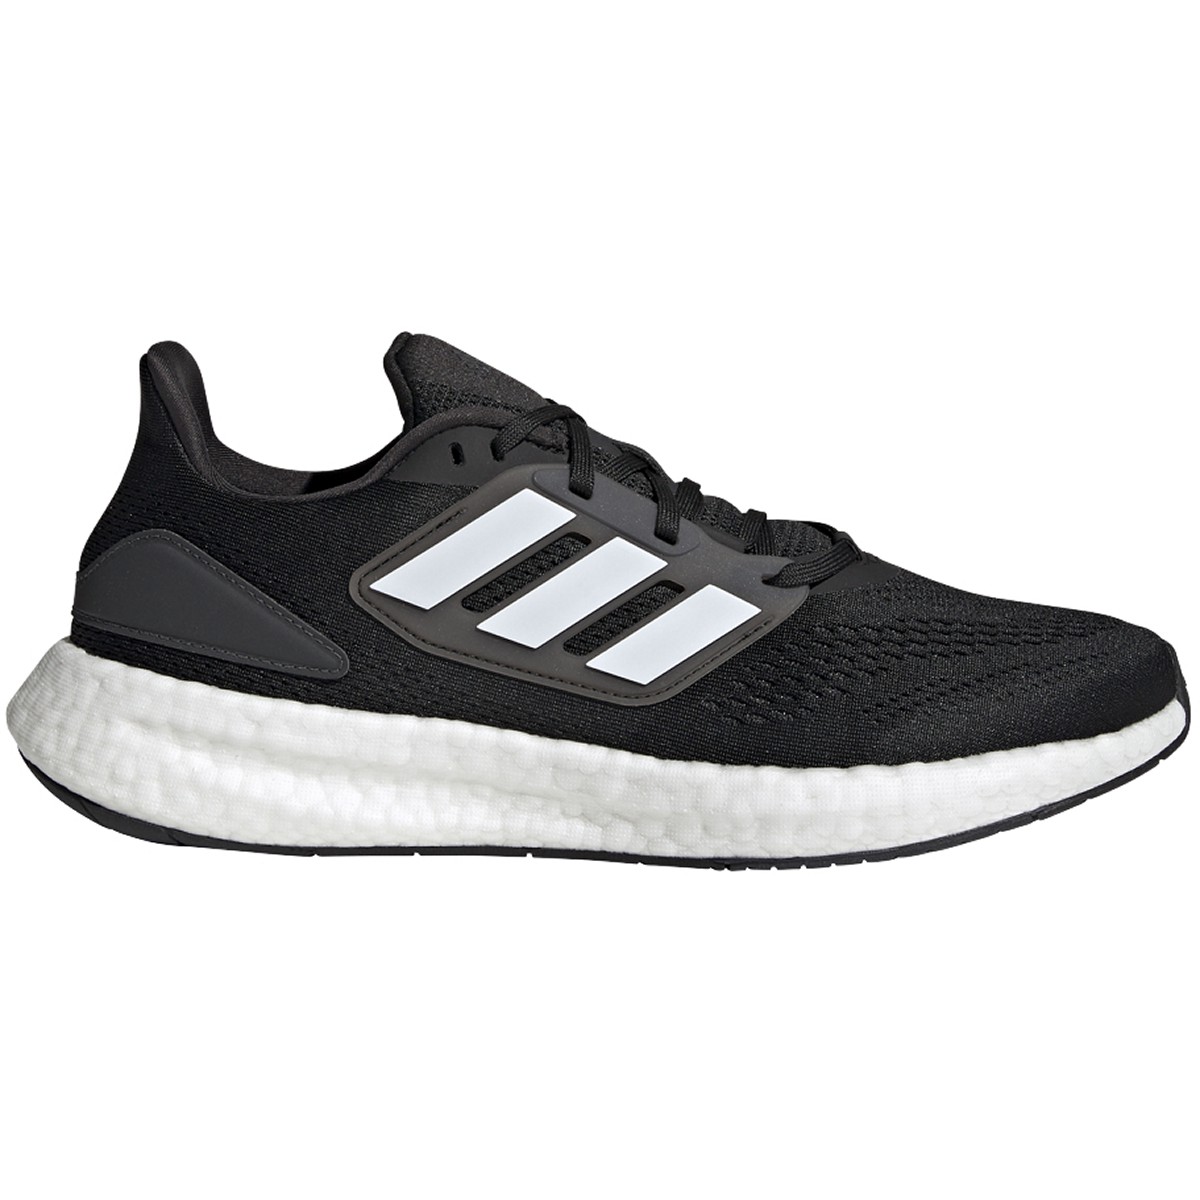 pureboost 22 shoes